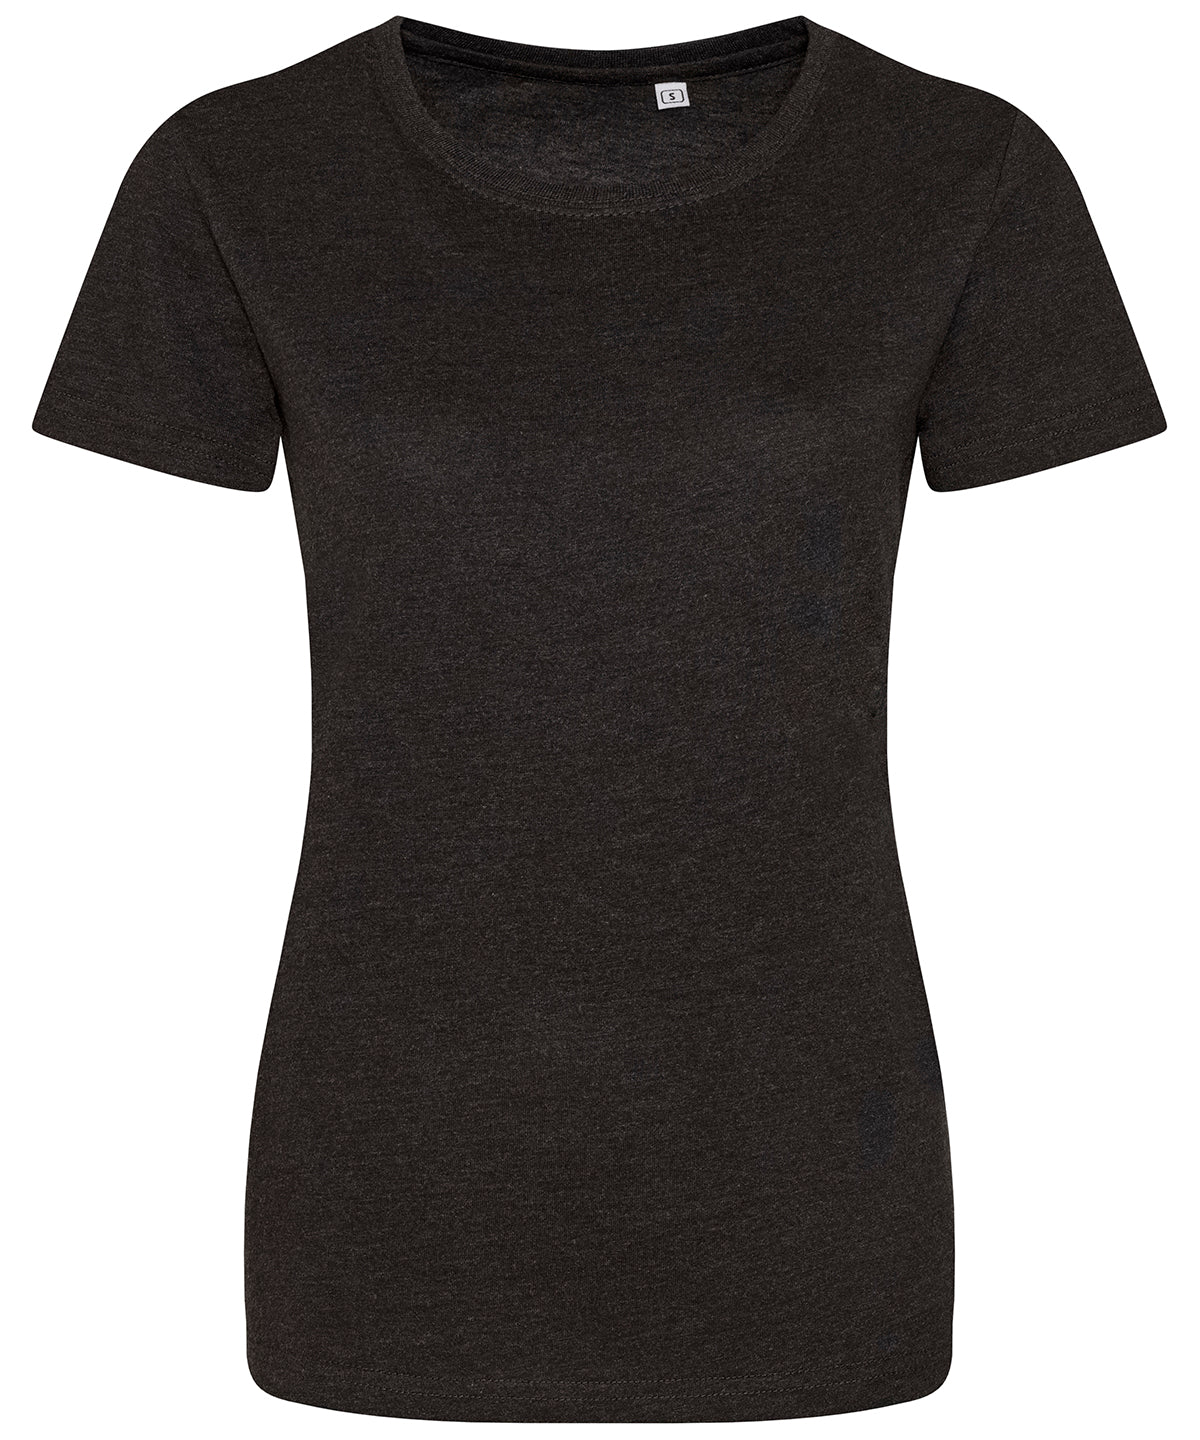 Personalised T-Shirts - Black AWDis Just T's Women's triblend T